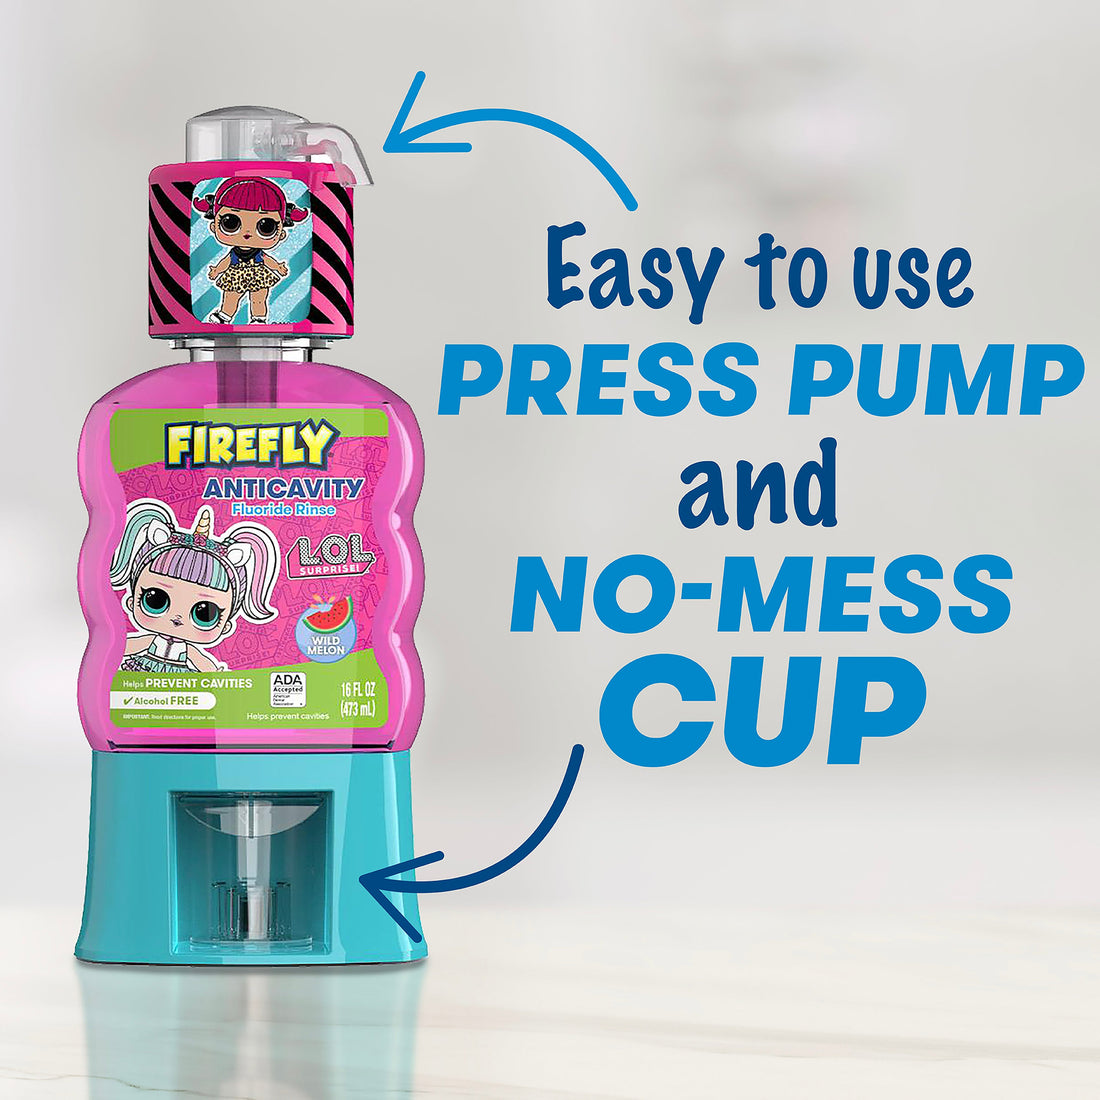 Firefly L.O.L. SURPRISE! Anti-cavity Fluoride Rinse, Wild Melon Flavor, 16 Oz, Easy to use, press pump and no-mess cup